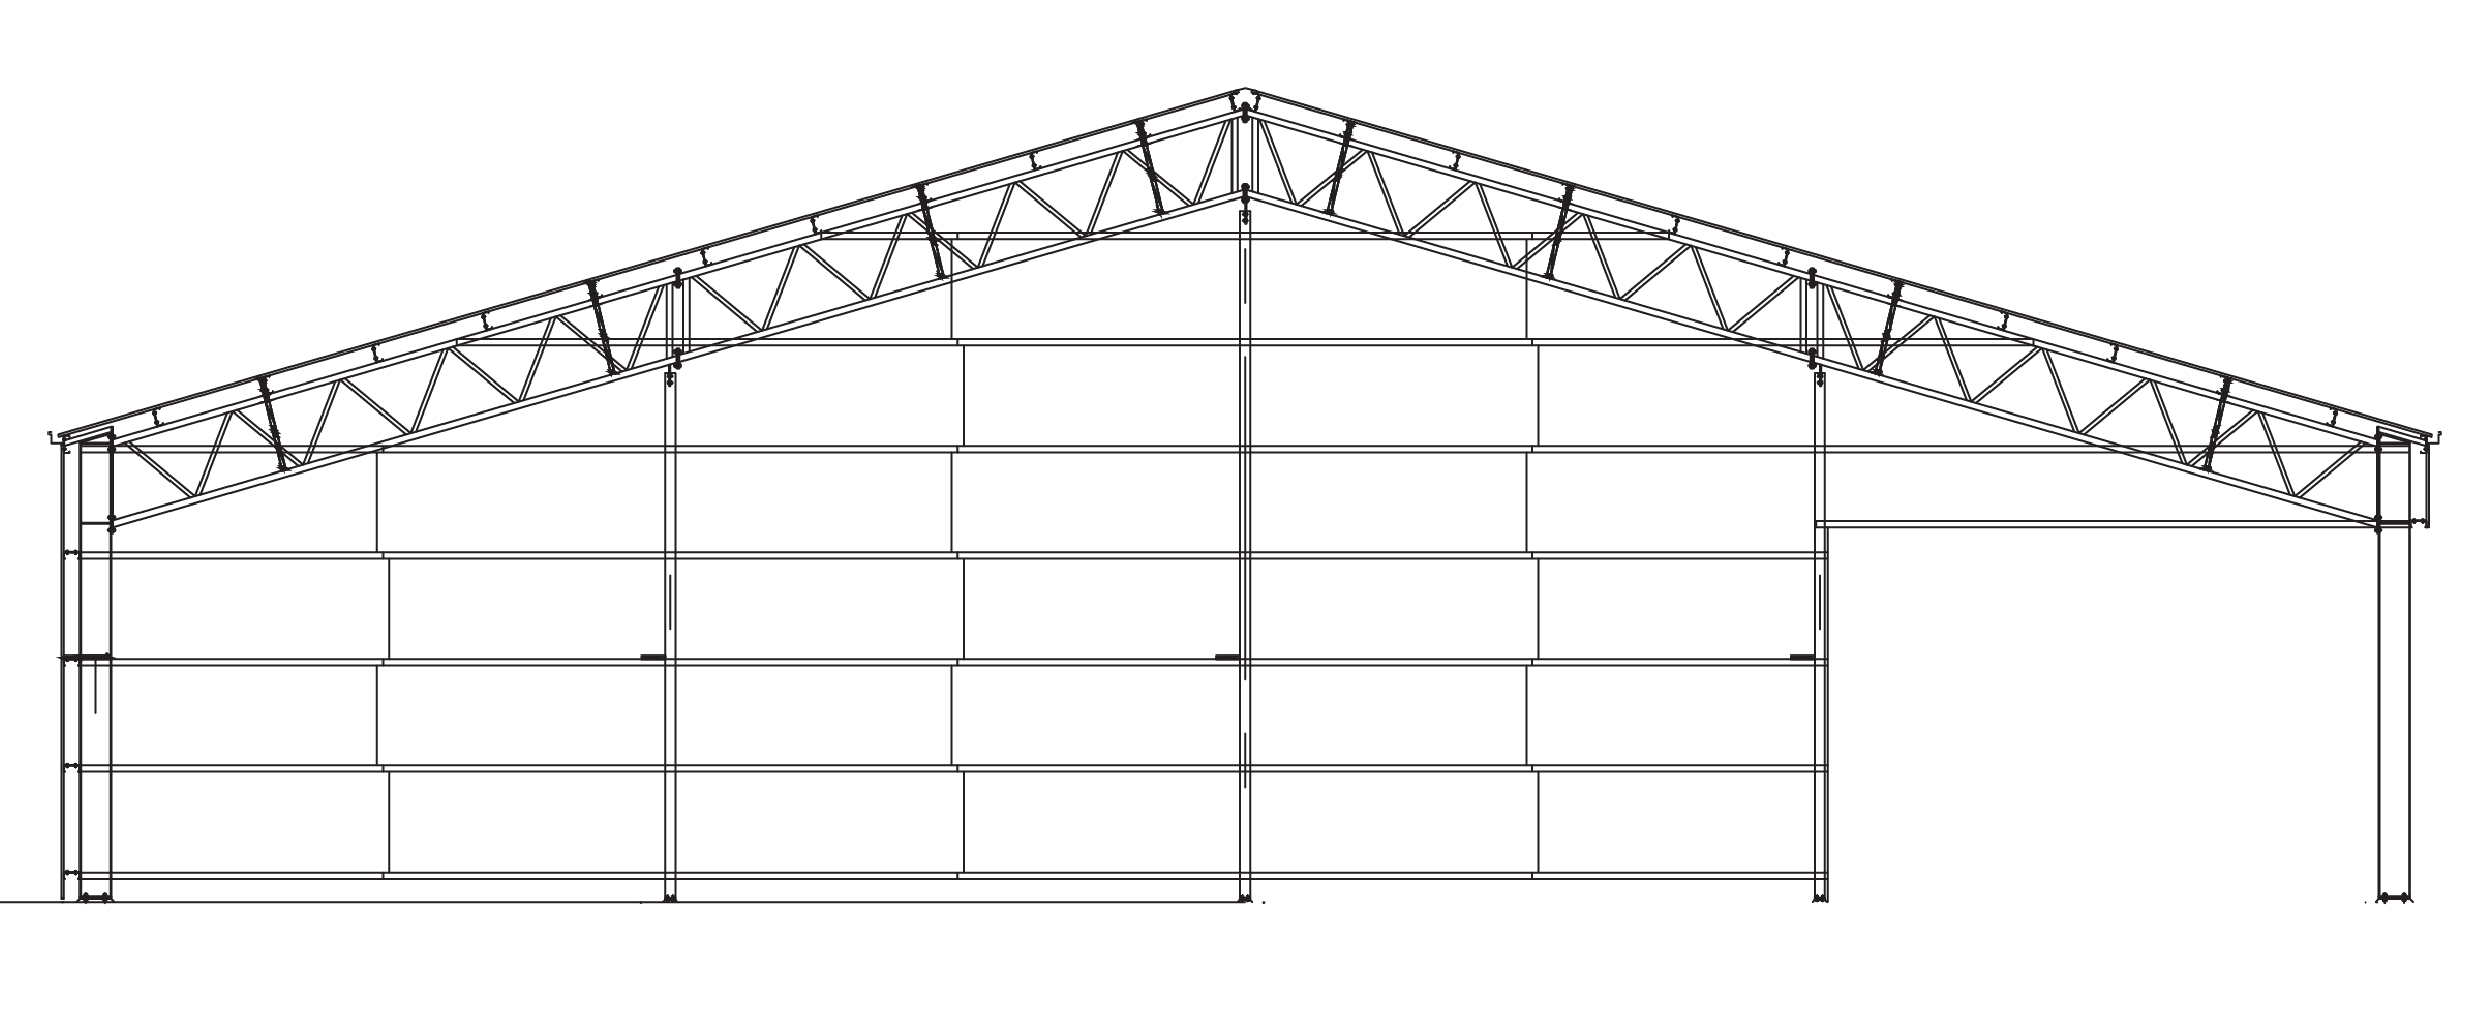 Springhill equestrian shed drawing